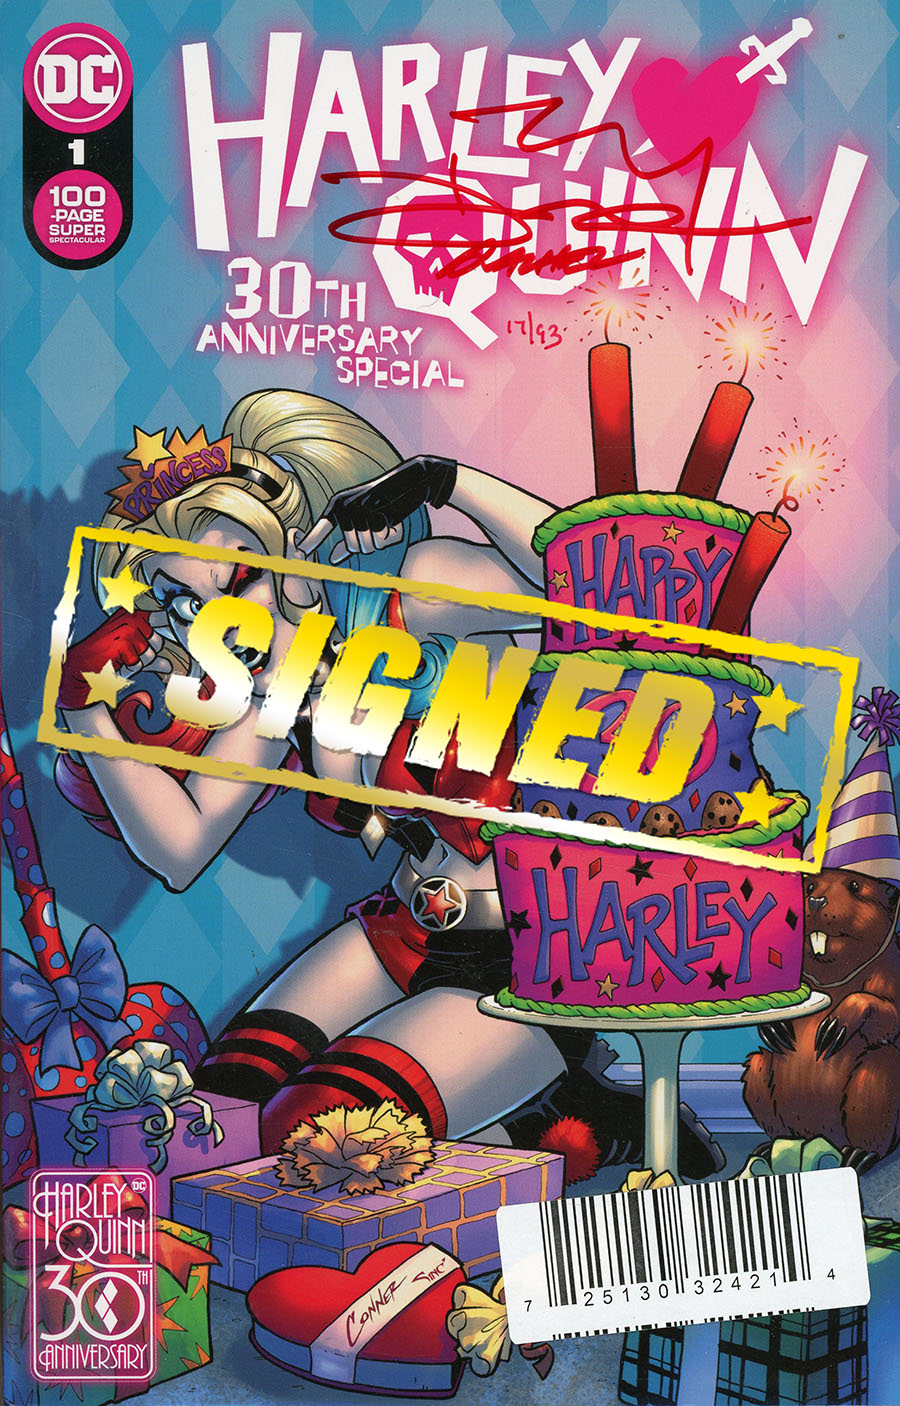 Harley Quinn 30th Anniversary Special #1 (One Shot) Cover O DF Signed By Terry Dodson & Rachel Dodson